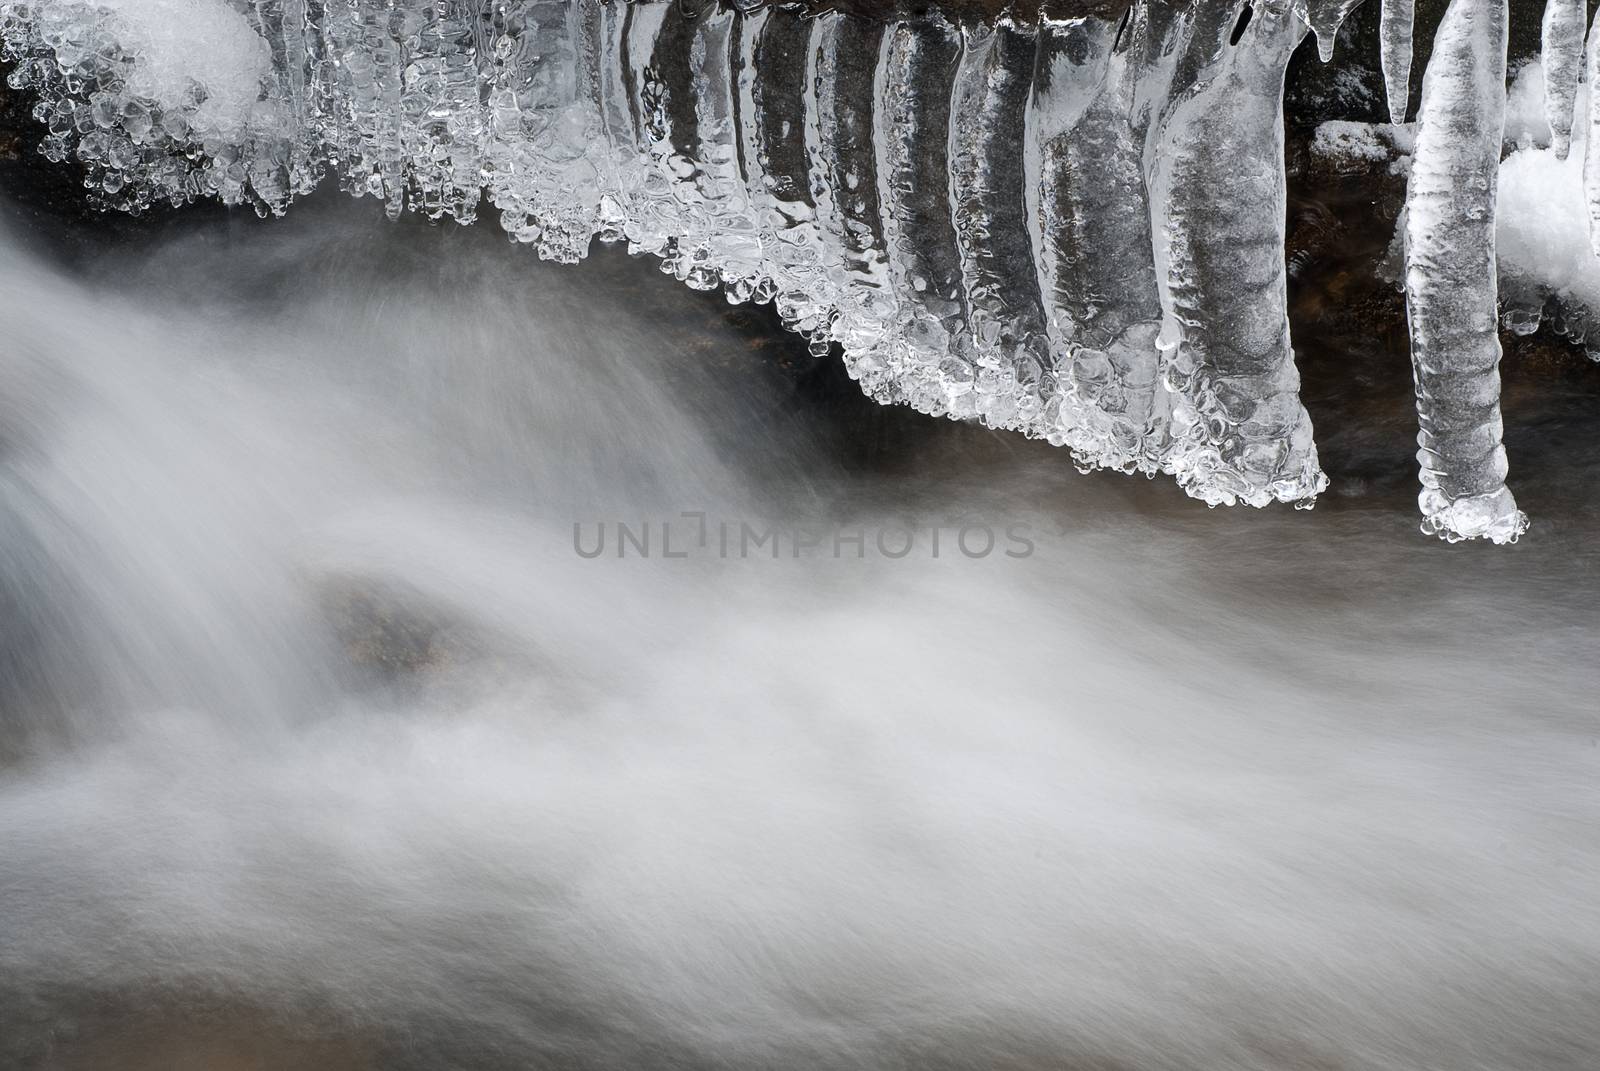 Formations of ice and snow near a river, Cold by jalonsohu@gmail.com